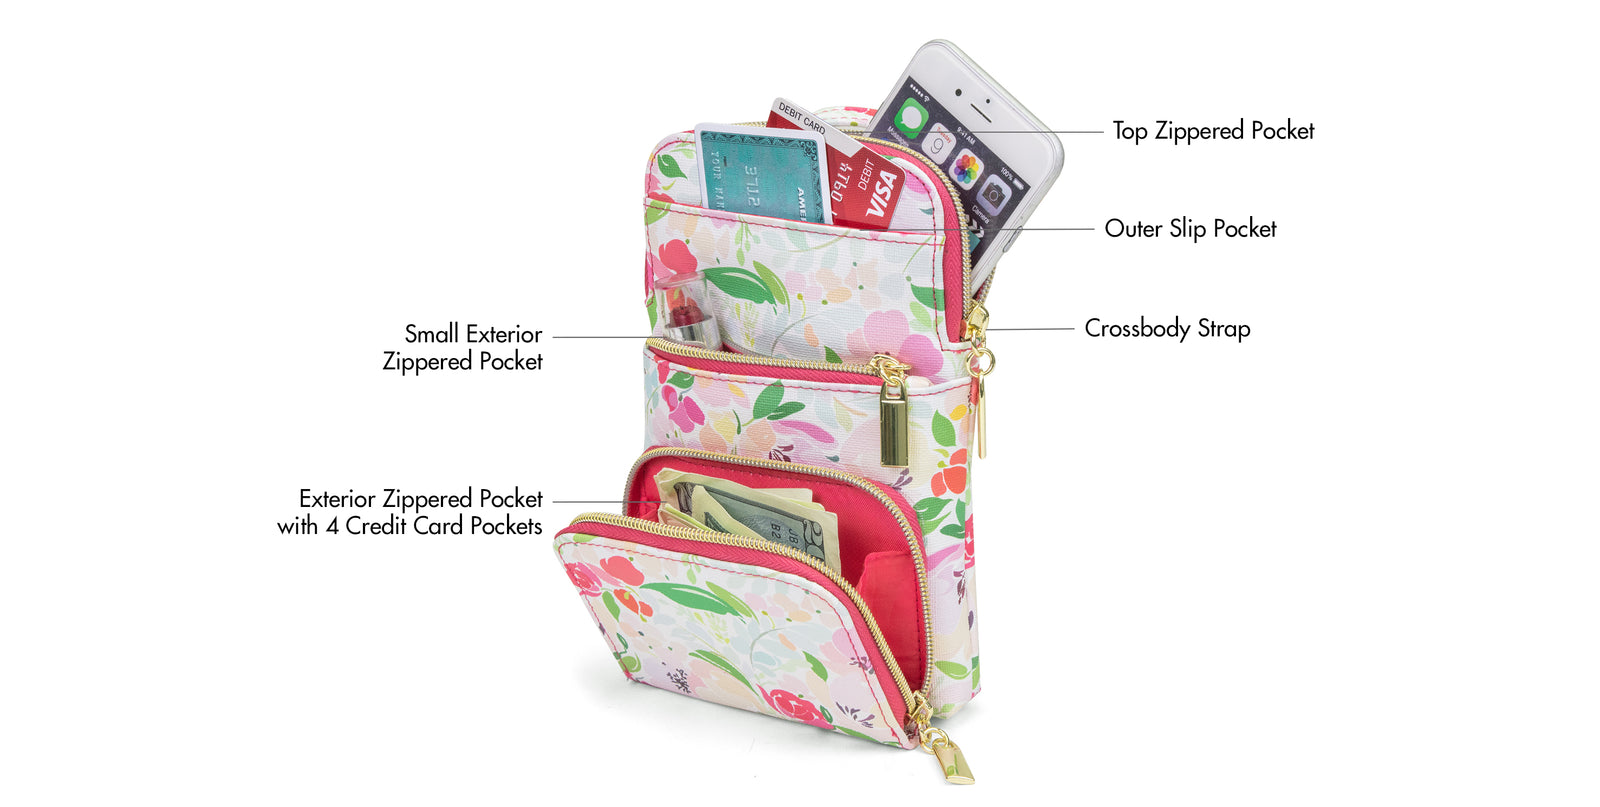 Little Miracle Cell Phone Bag - Mundi Wallets